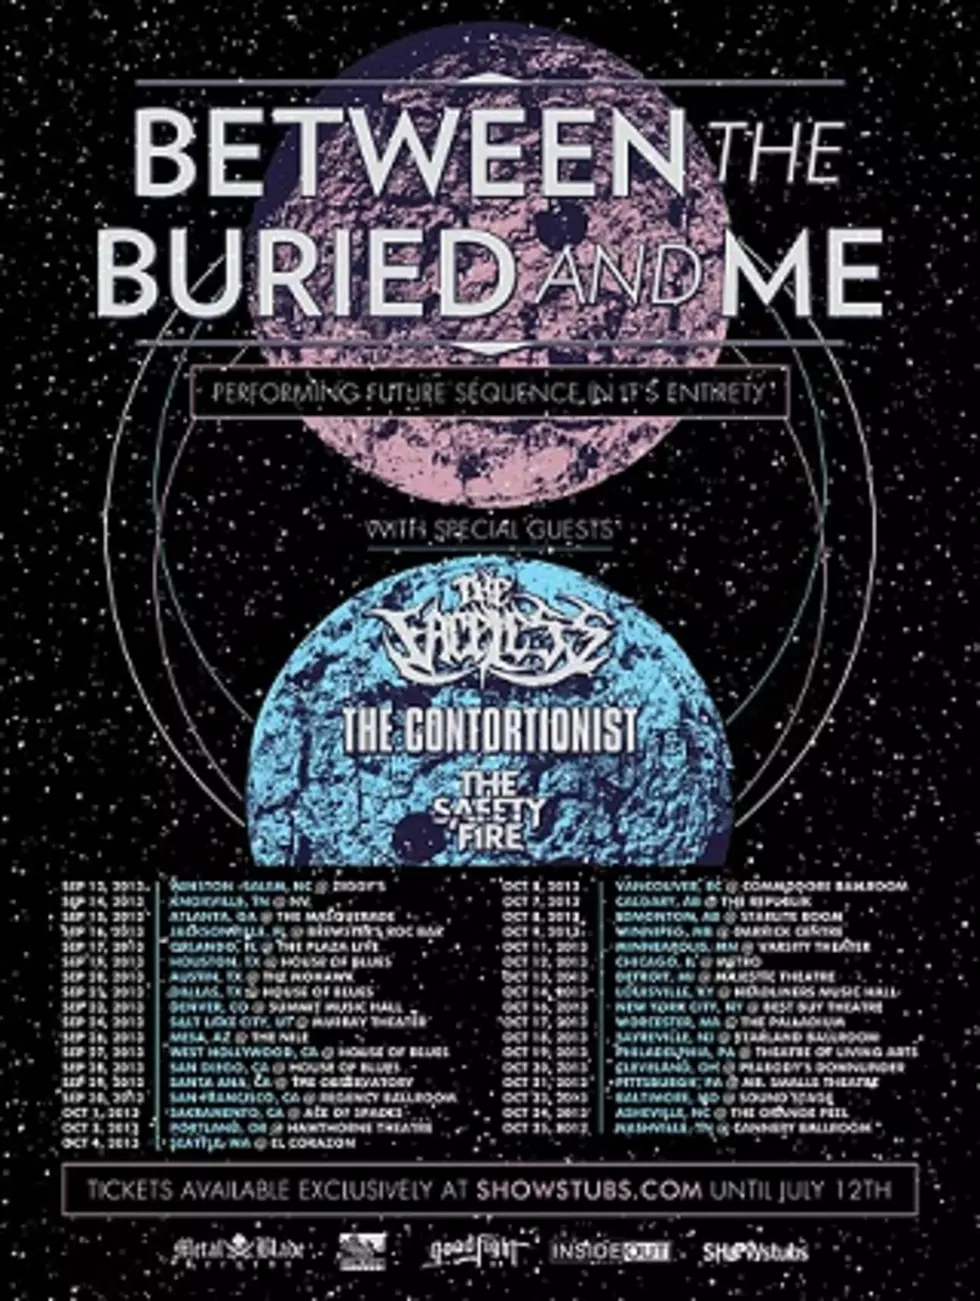 Between The Buried And Me announce fall tour with the Faceless, the Contortionist, the Safety Fire